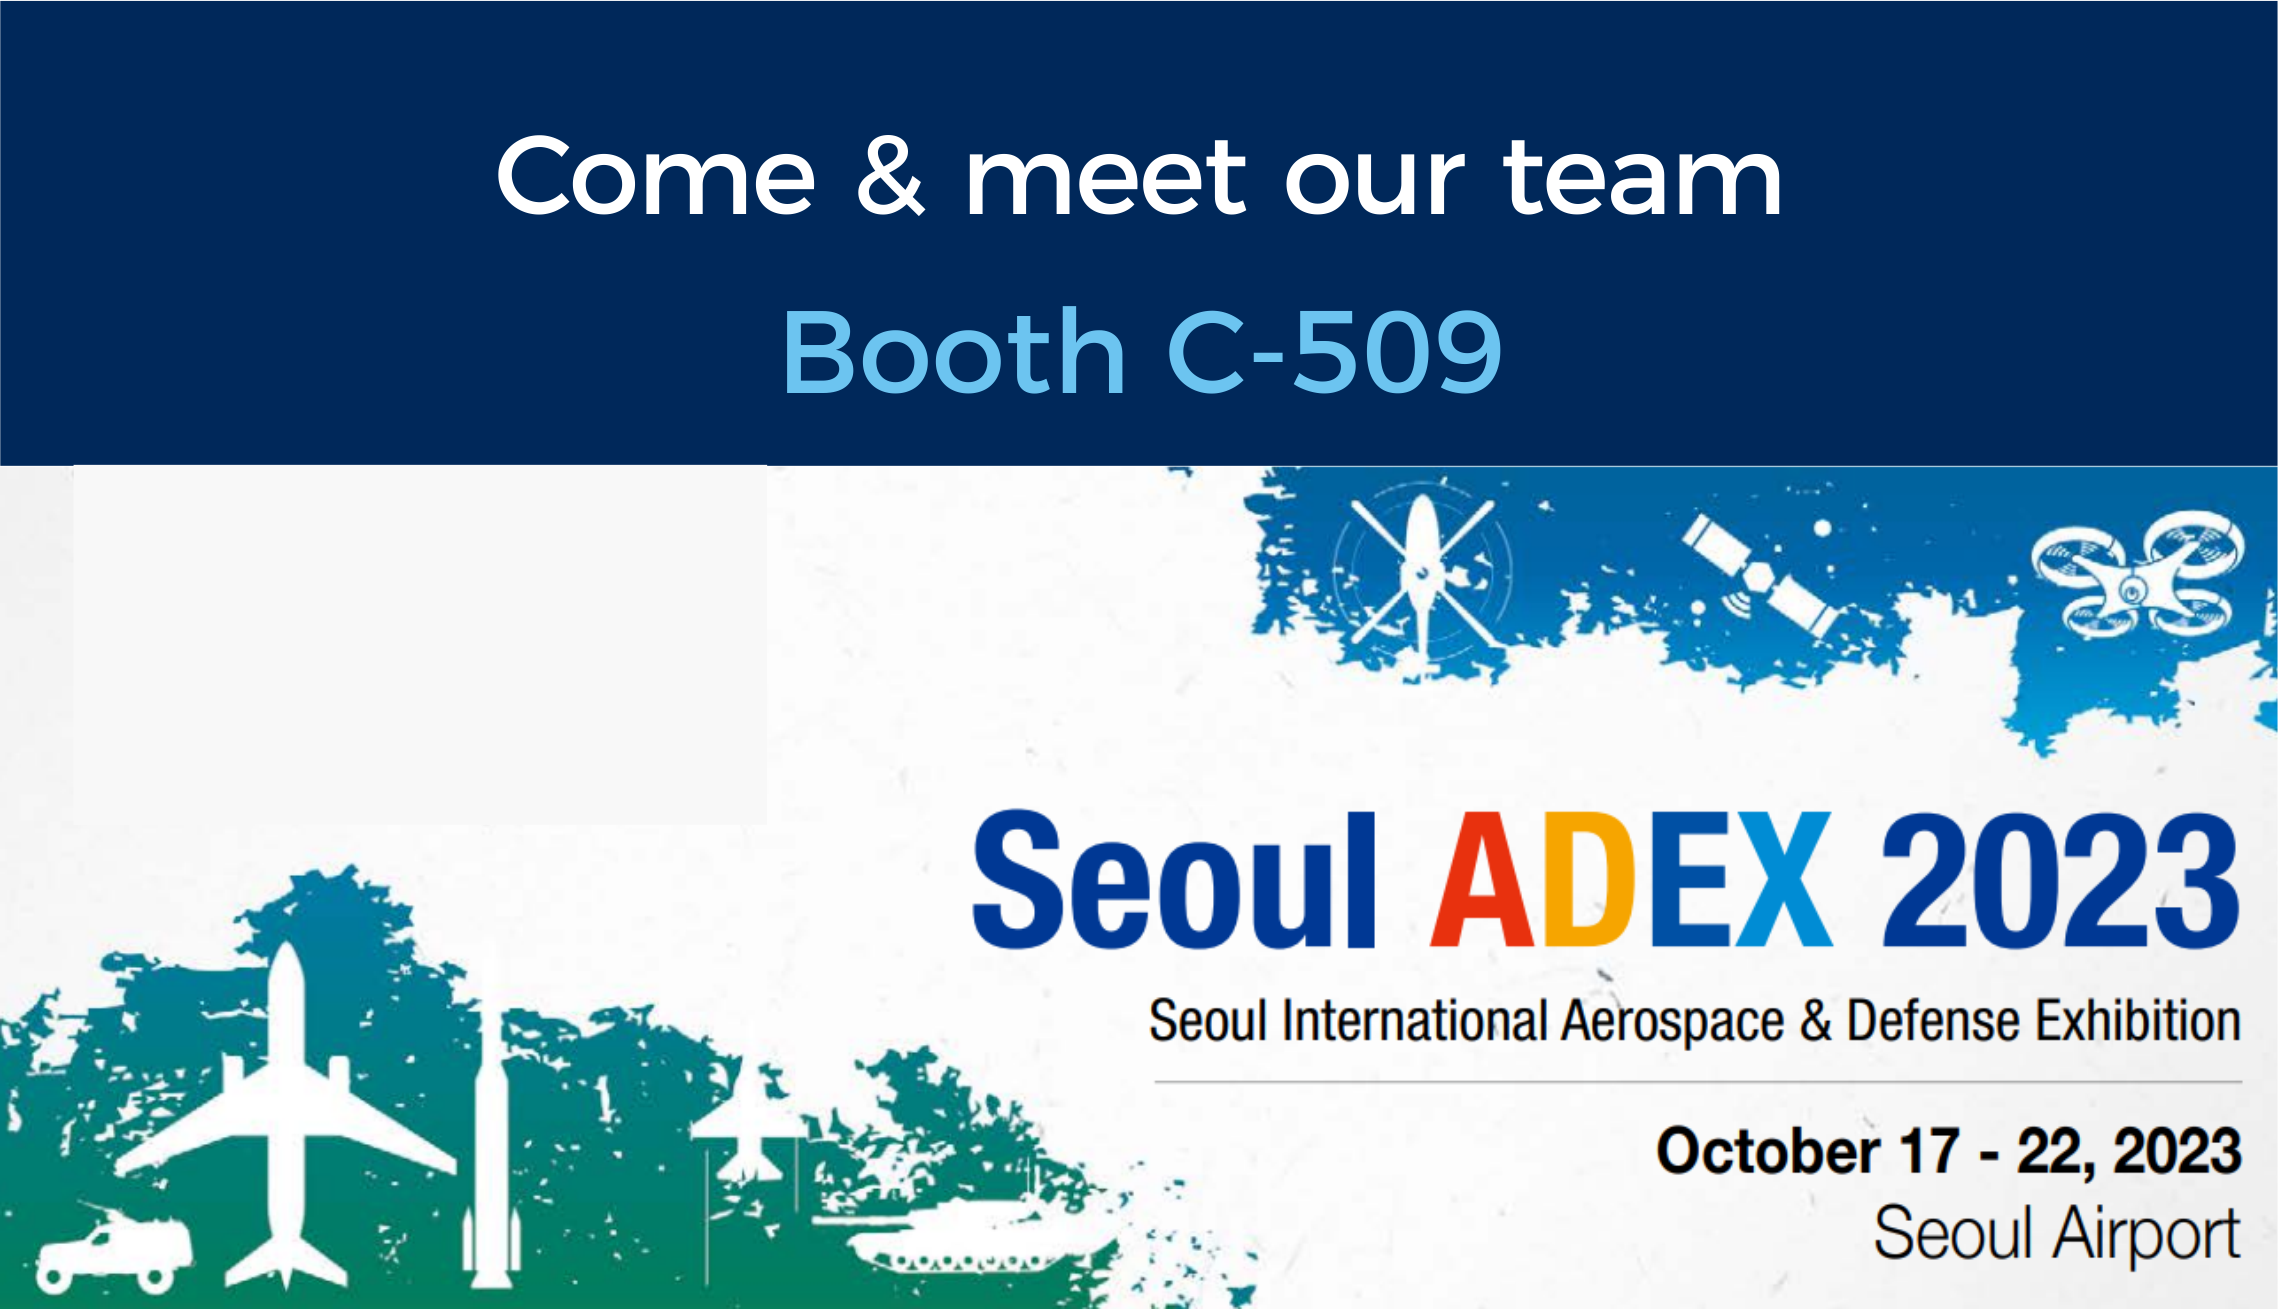 Our team will be present at the ADEX exhibition in Seoul